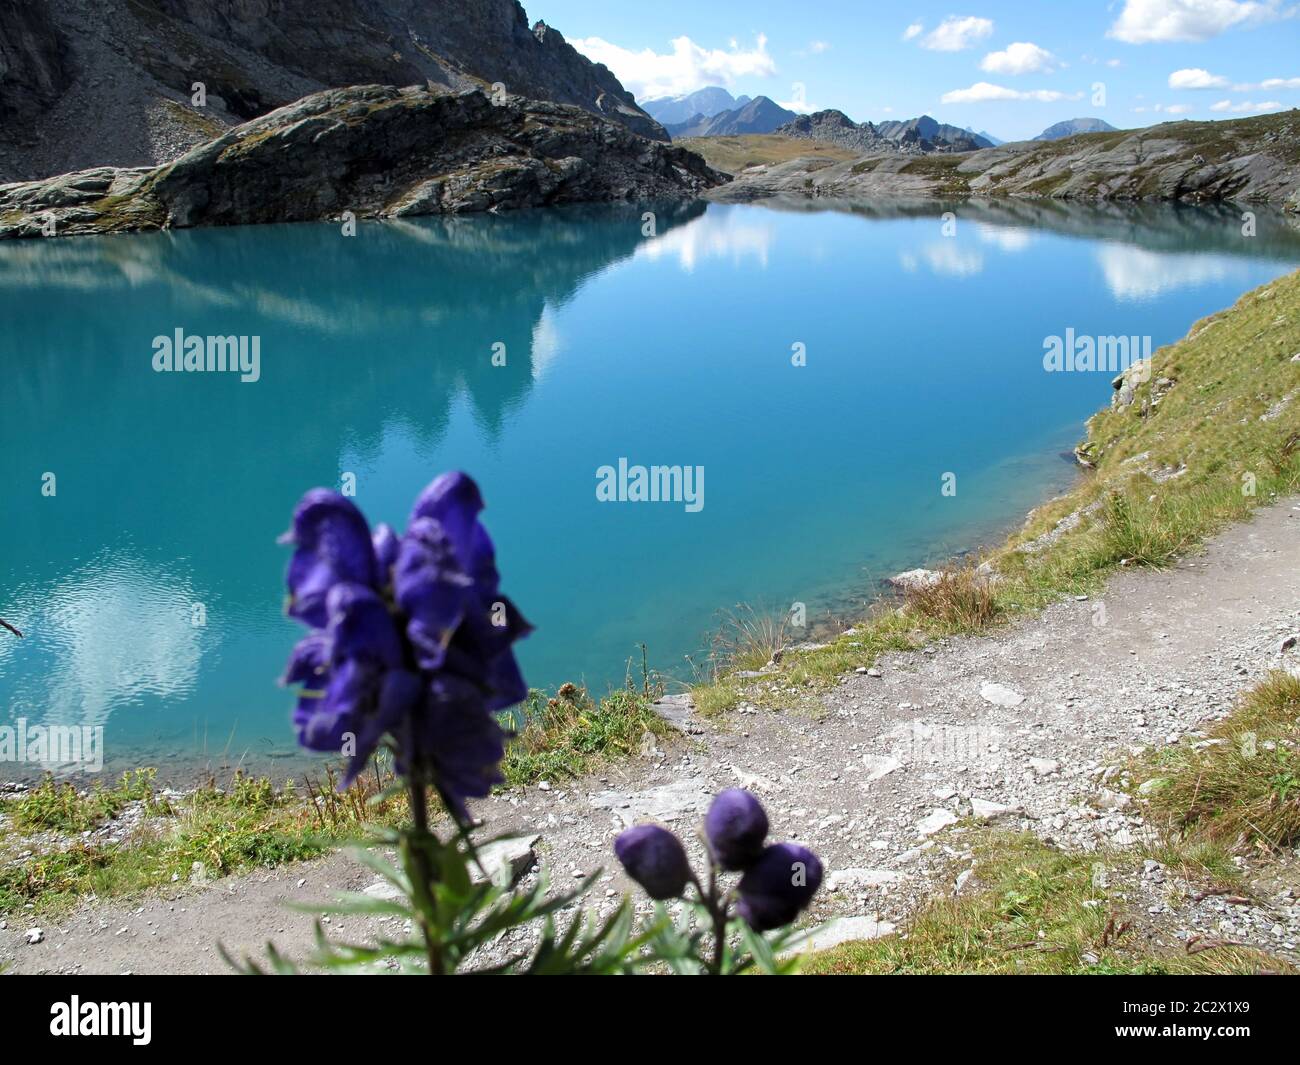 gray mountain tops, cotton clouds and a deep blue sky are reflected in the sunny turquoise alpine lak with hiking trails and the blue monkshood flower Stock Photo